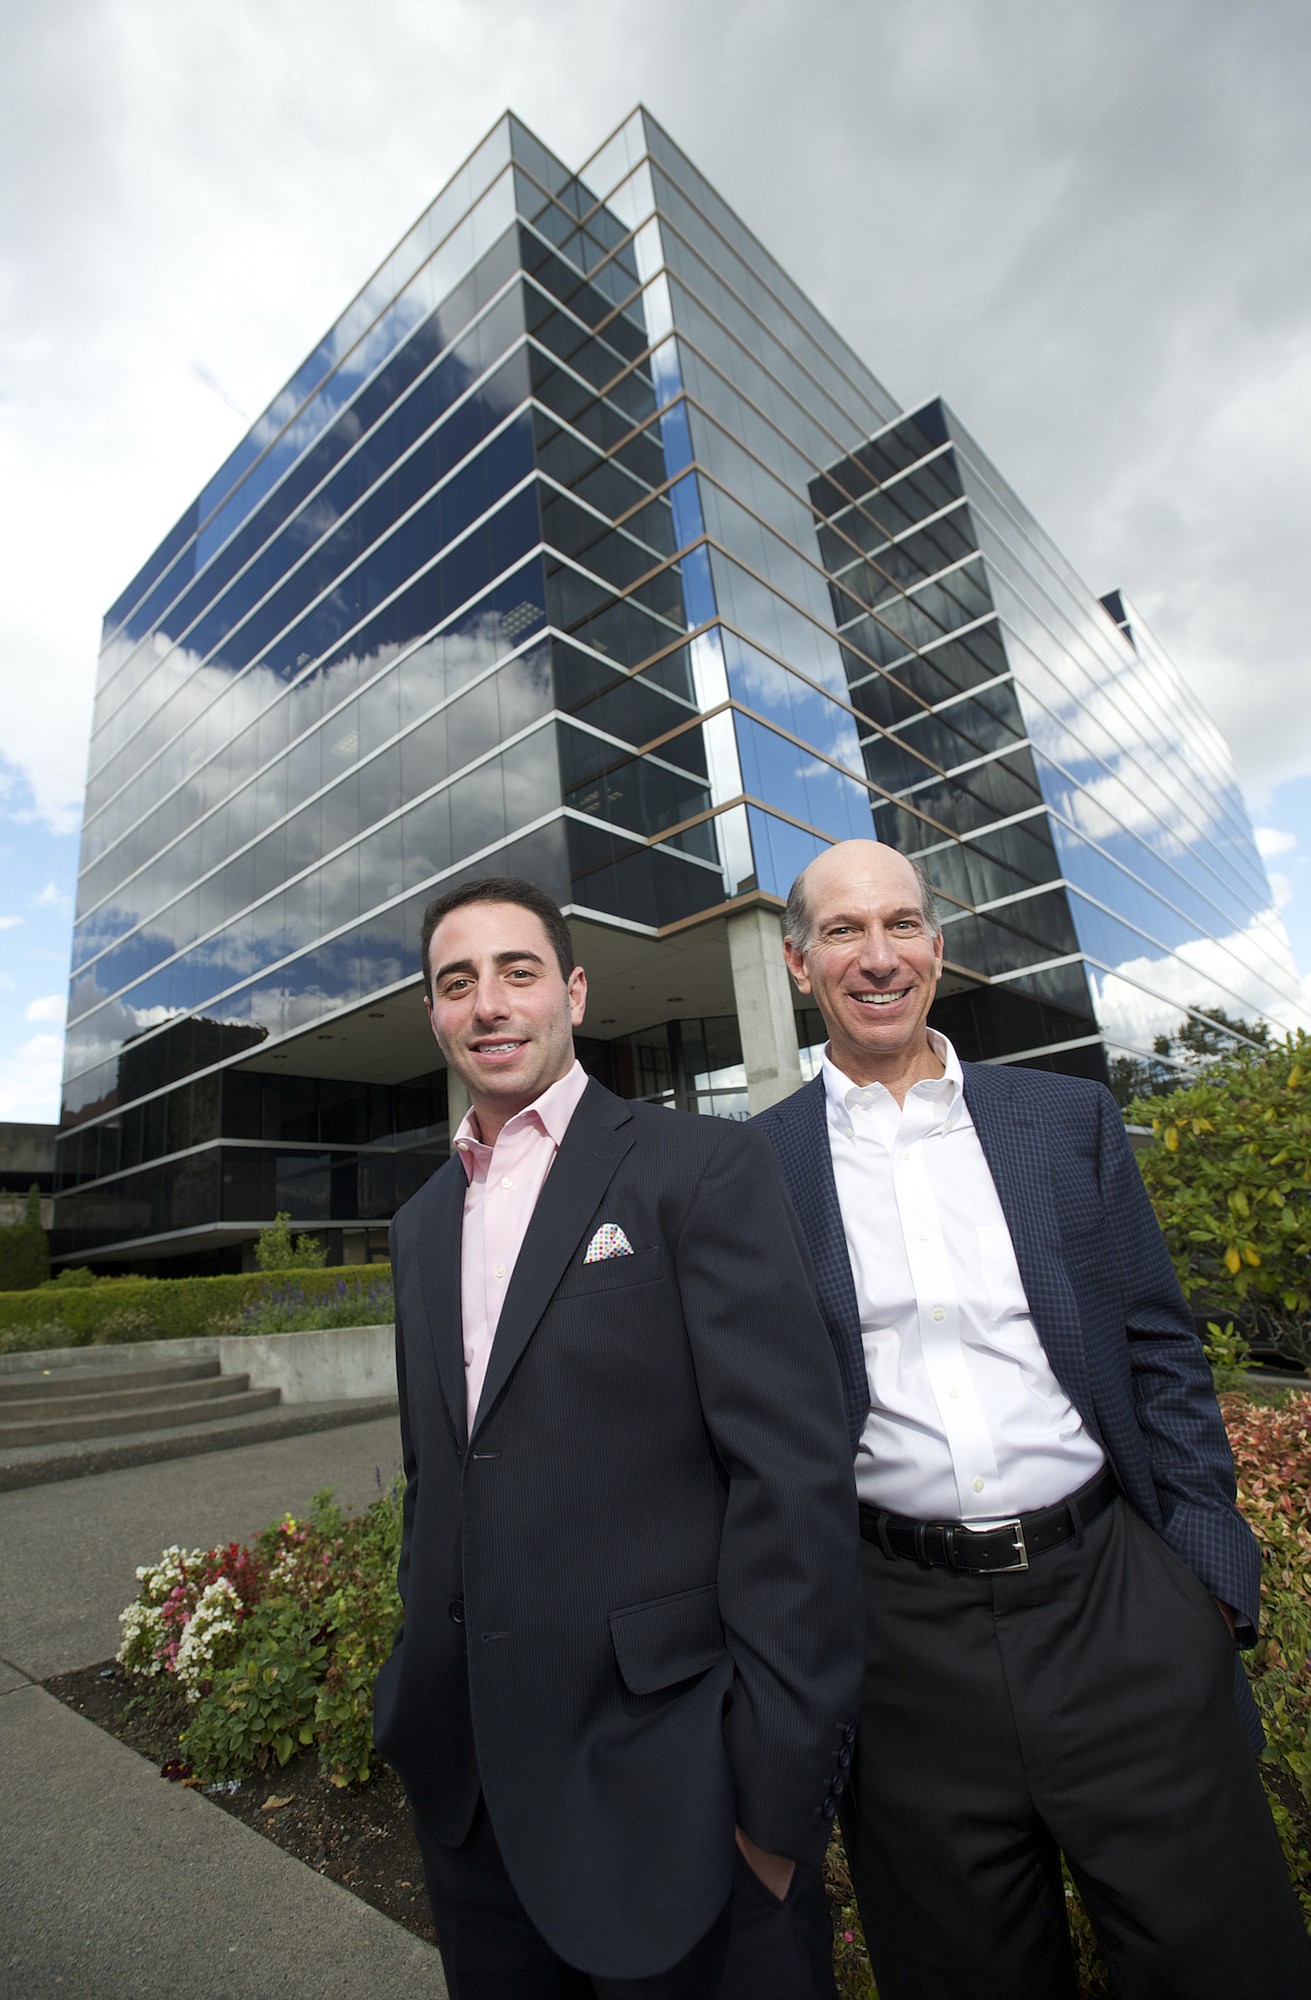 Portland-based property investment firm Menashe Group is purchasing Main Place, at 1111 Main St., in a $12.15 million deal set to close Tuesday. Jordan Menashe, left, led the transaction for the firm headed by his father, Barry Menashe.